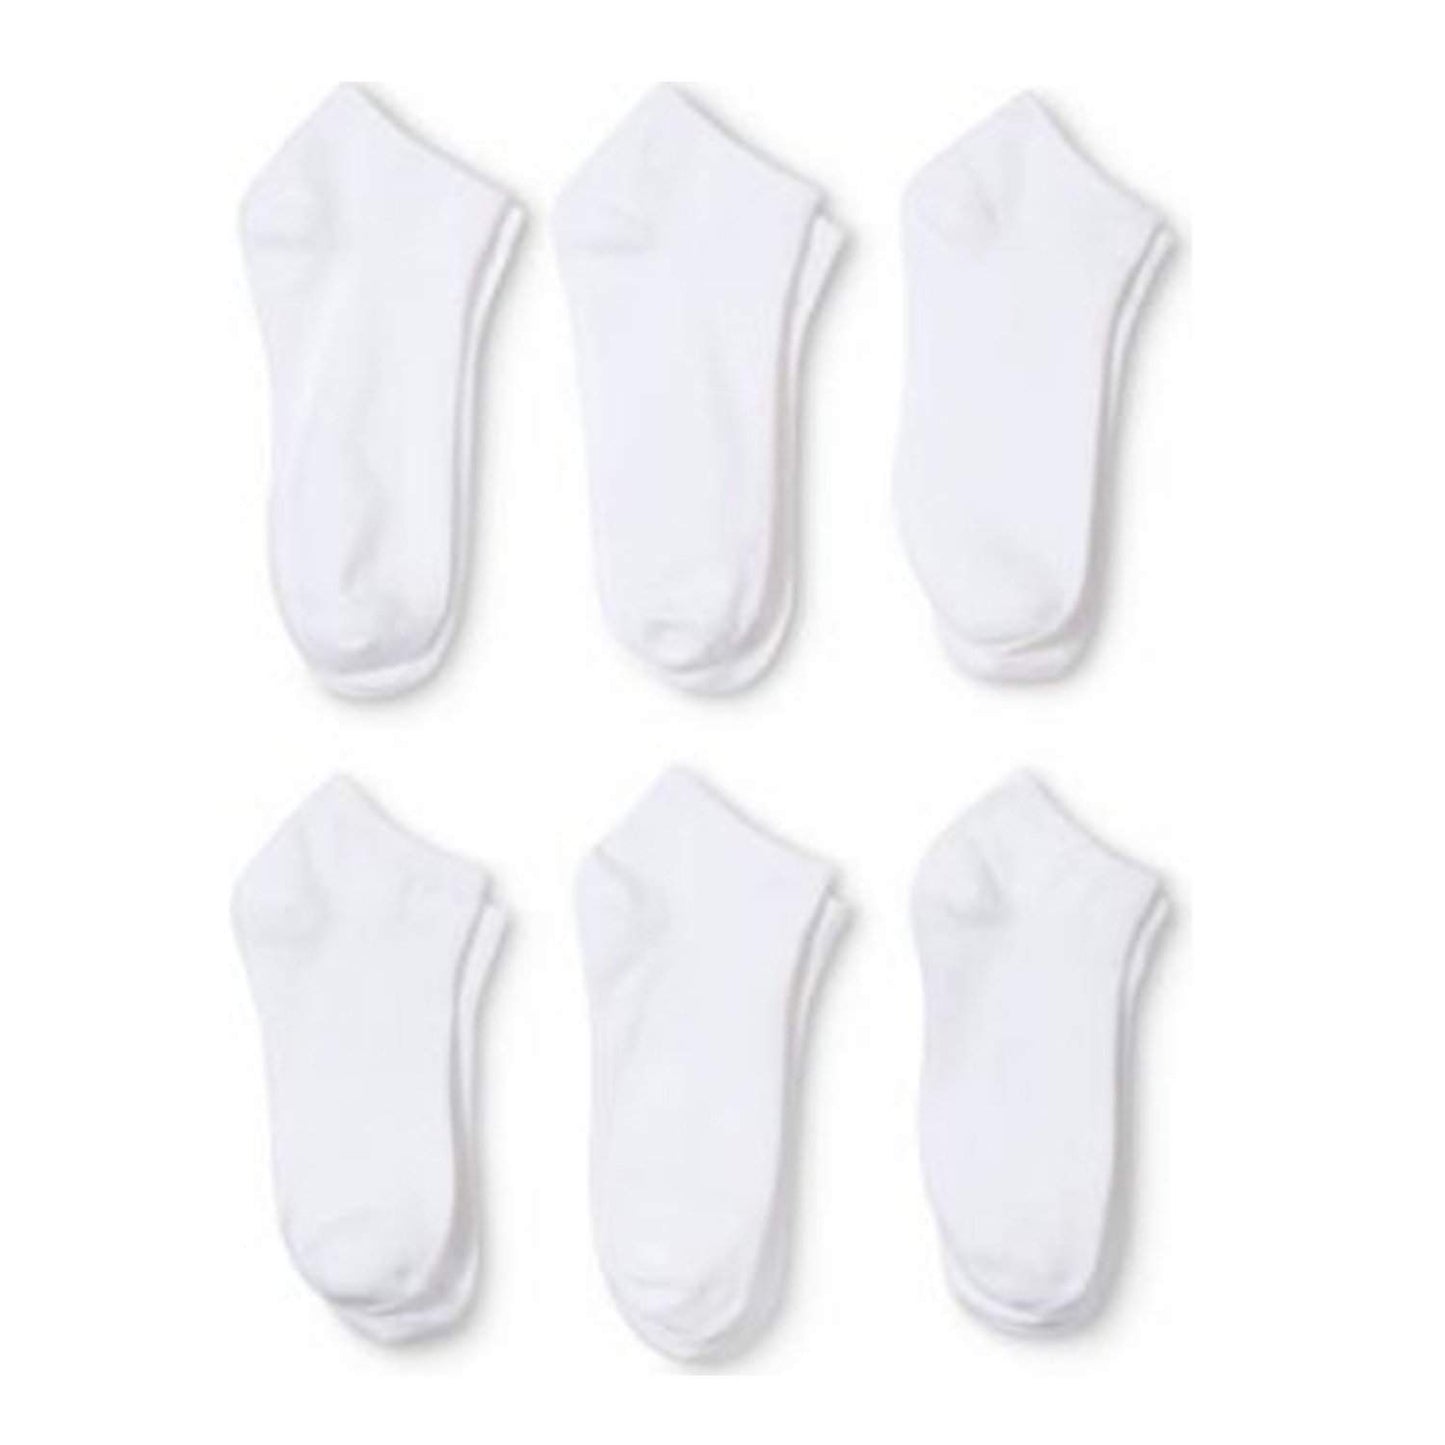 24 Pairs Women's Ankle No Show Socks - Polyester and Spandex - Black or White